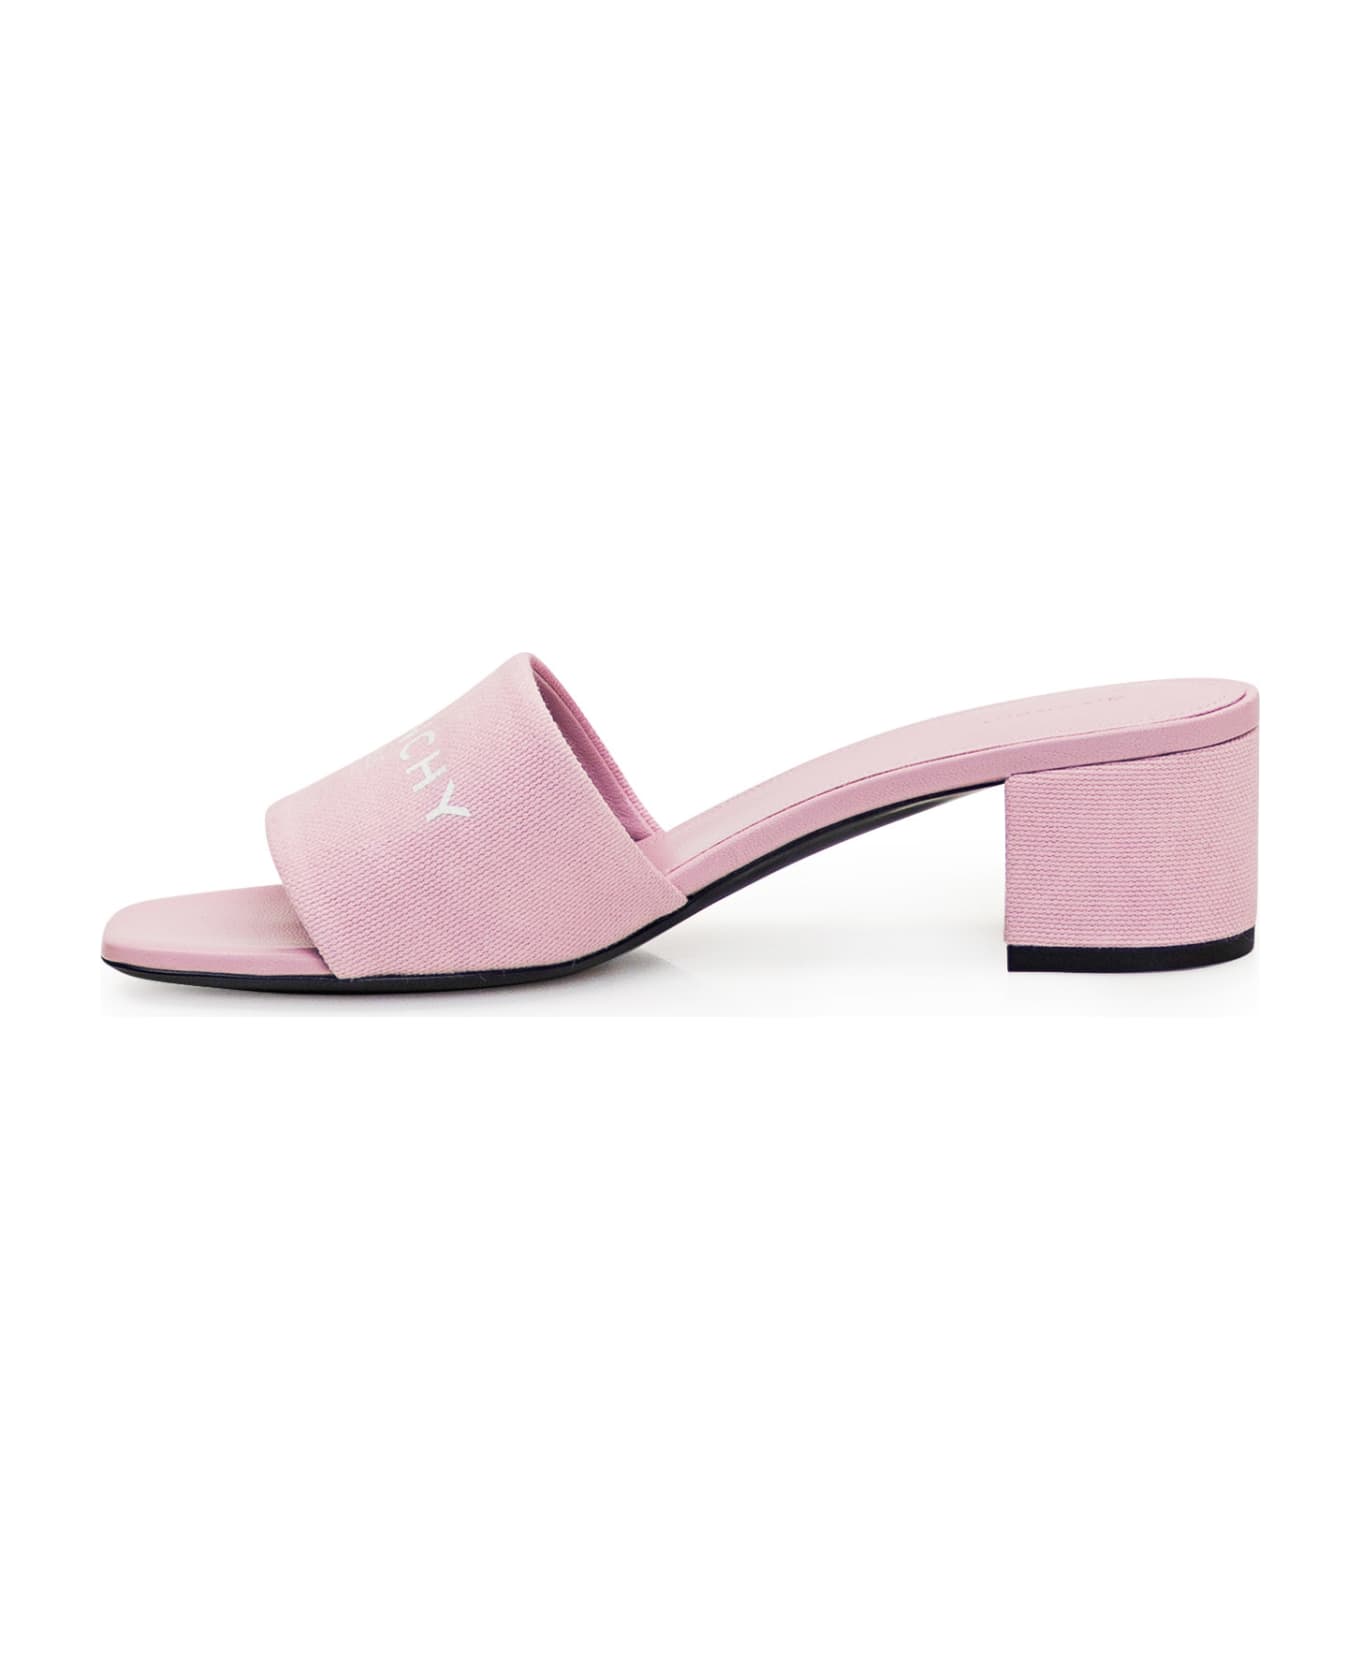 Givenchy 4g Sandals - OLD PINK